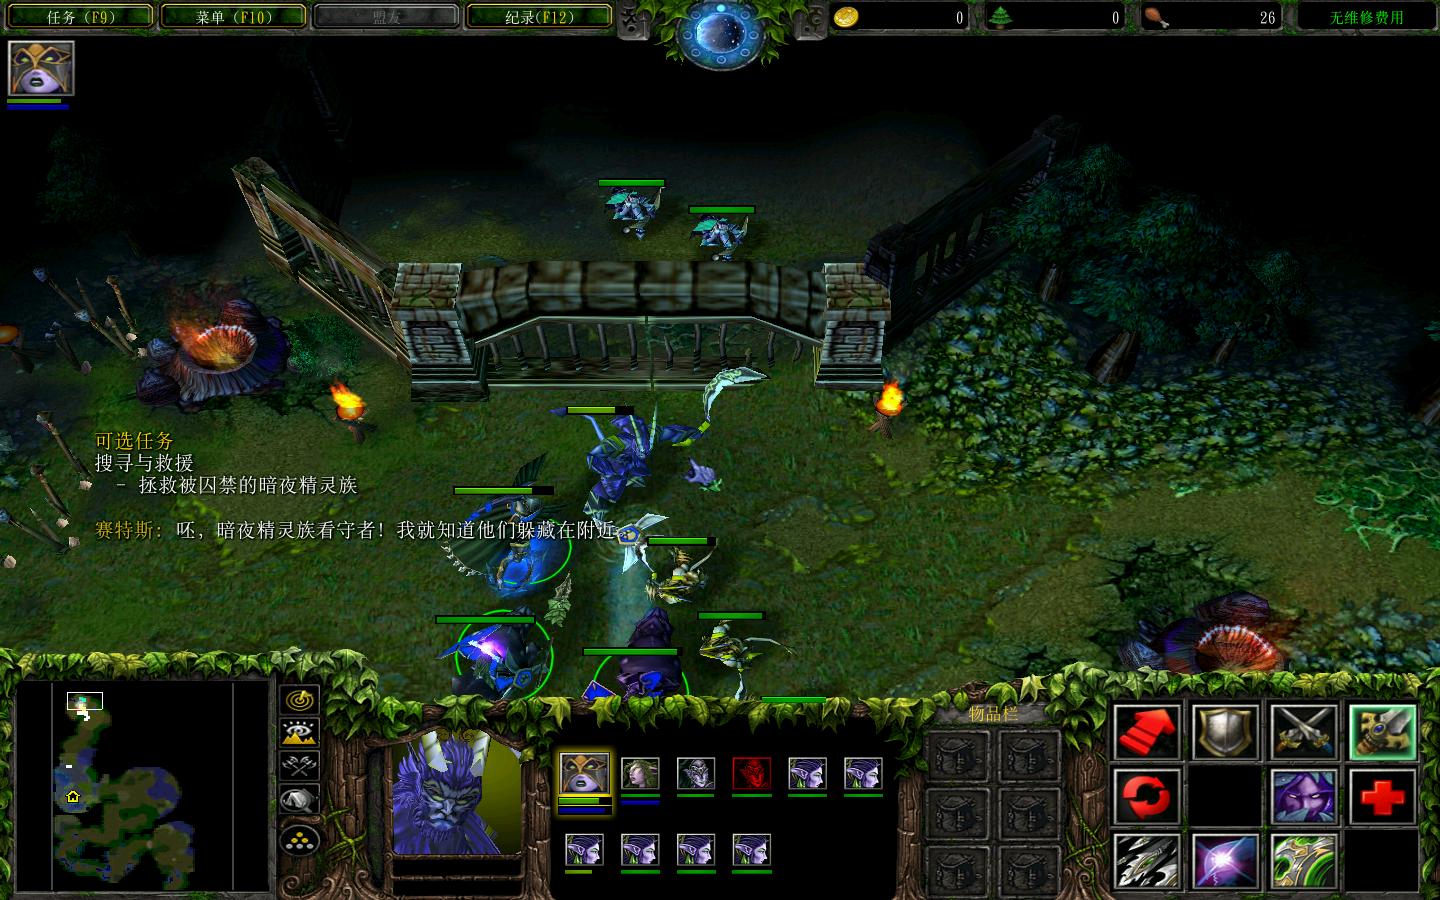 ħ3Warcraft III The Frozen Throne1.24-1.27Ӣ۵ v18.6޸